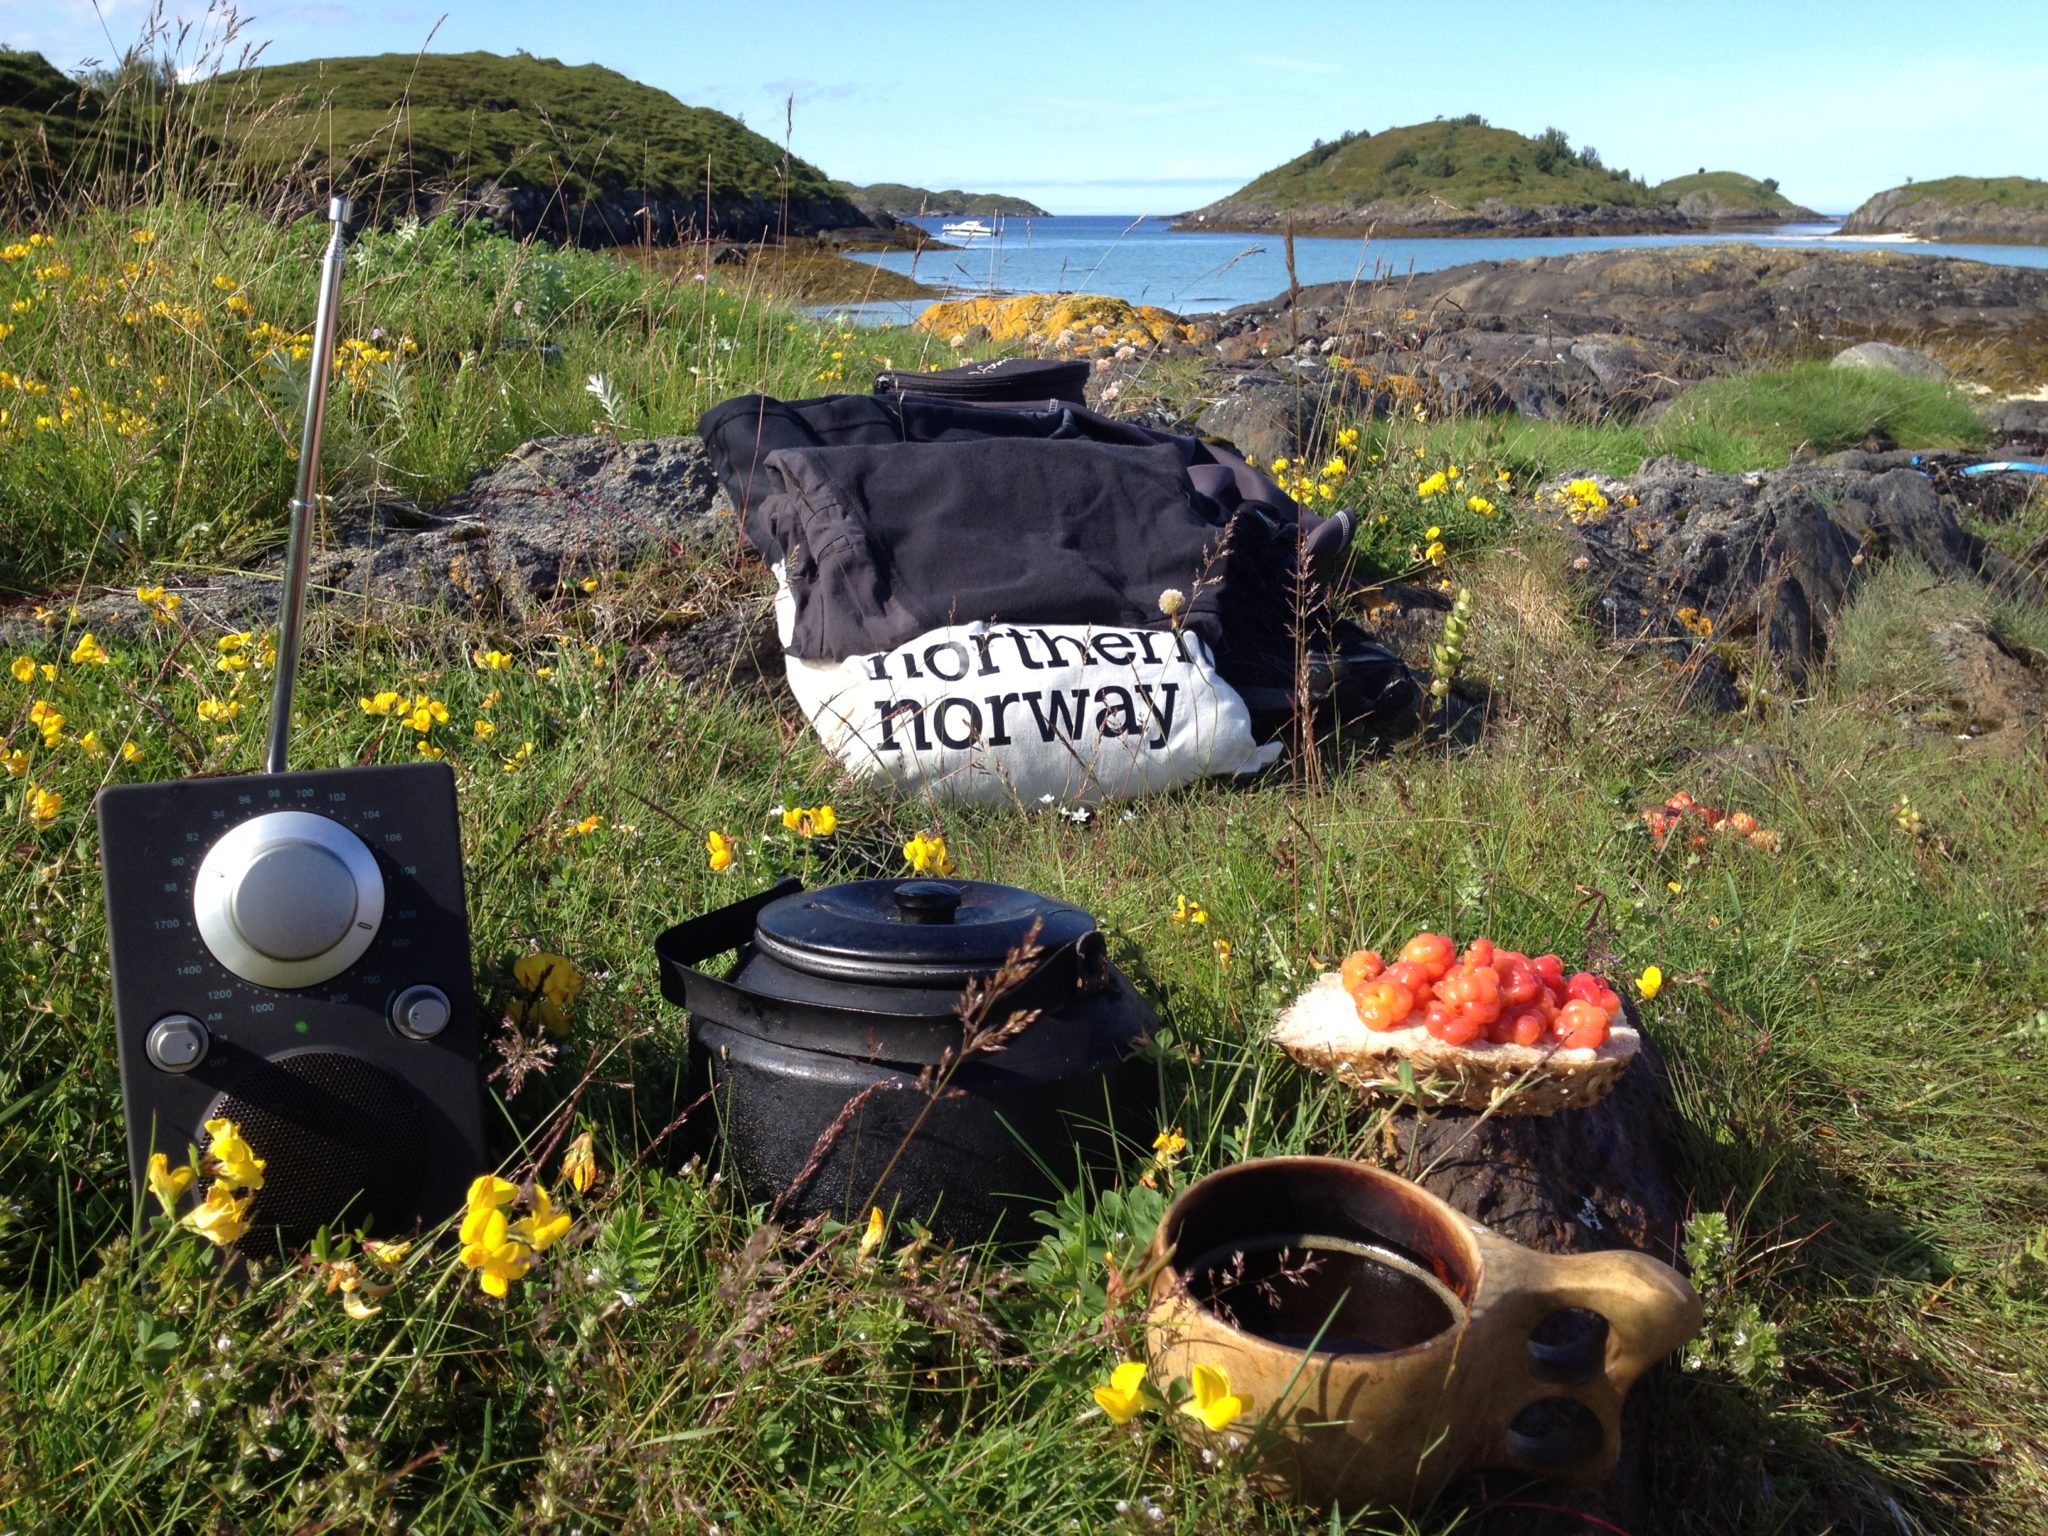 The travel radio, campfire coffee and freshly picked cloud berries in the Bodø archipelago. Photo: Roger Johansen / nordnorge.com